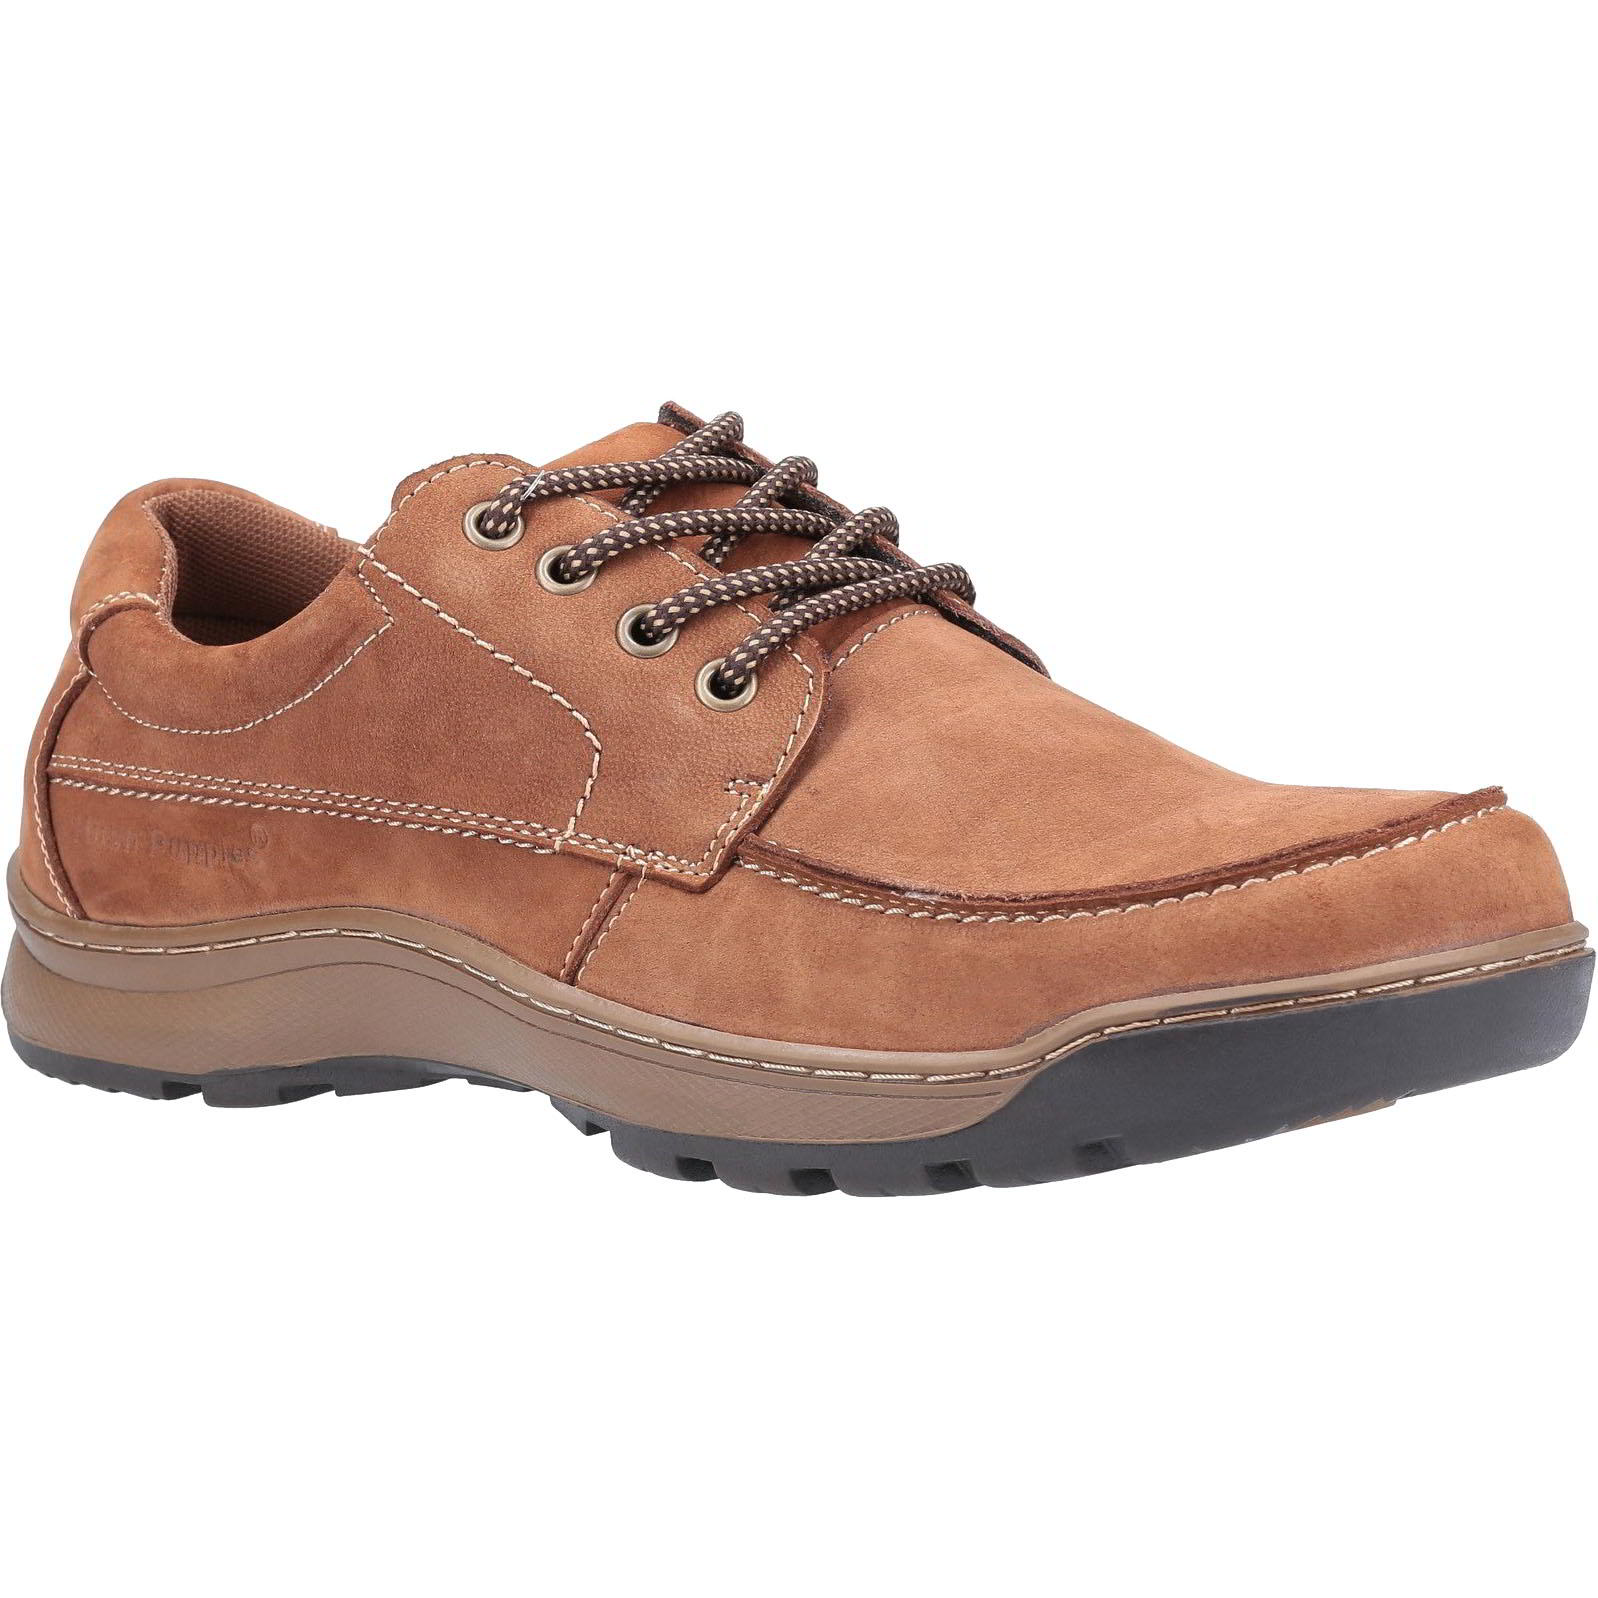 Hush Puppies Men's Tucker Leather Lace Up Shoes - UK 9